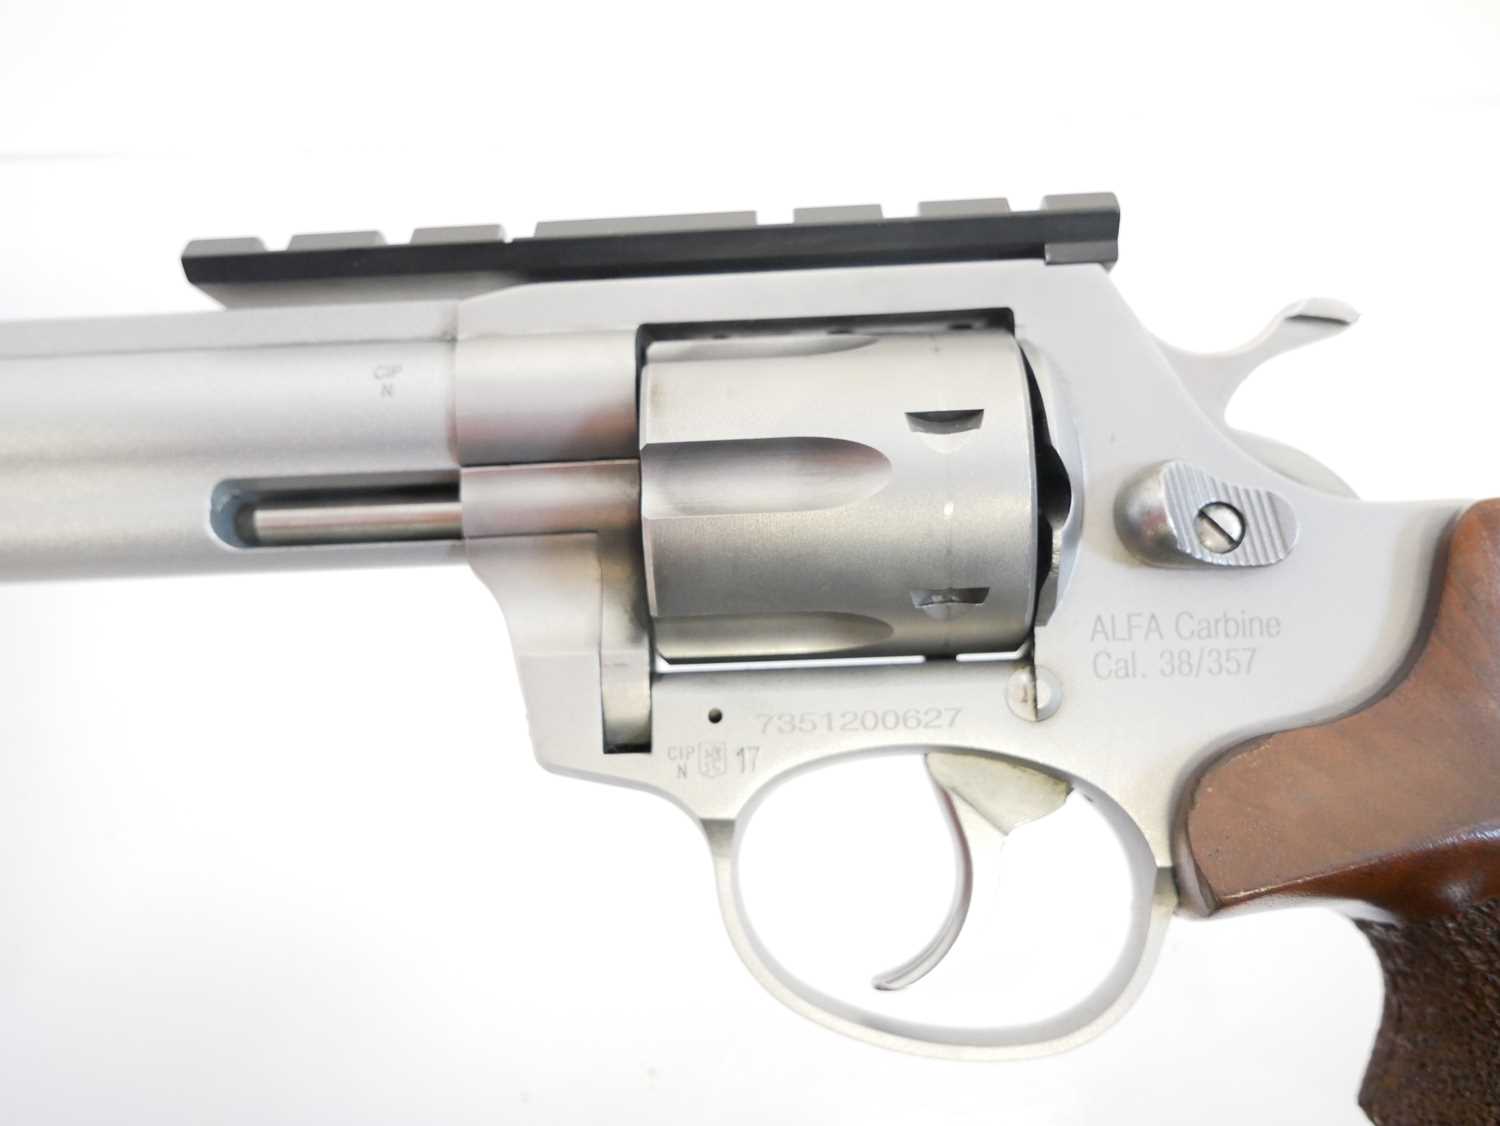 Alfa Brno .357 long barrel revolver, serial number 7351200627, 12 inch barrel, fitted with Picatinny - Image 7 of 13